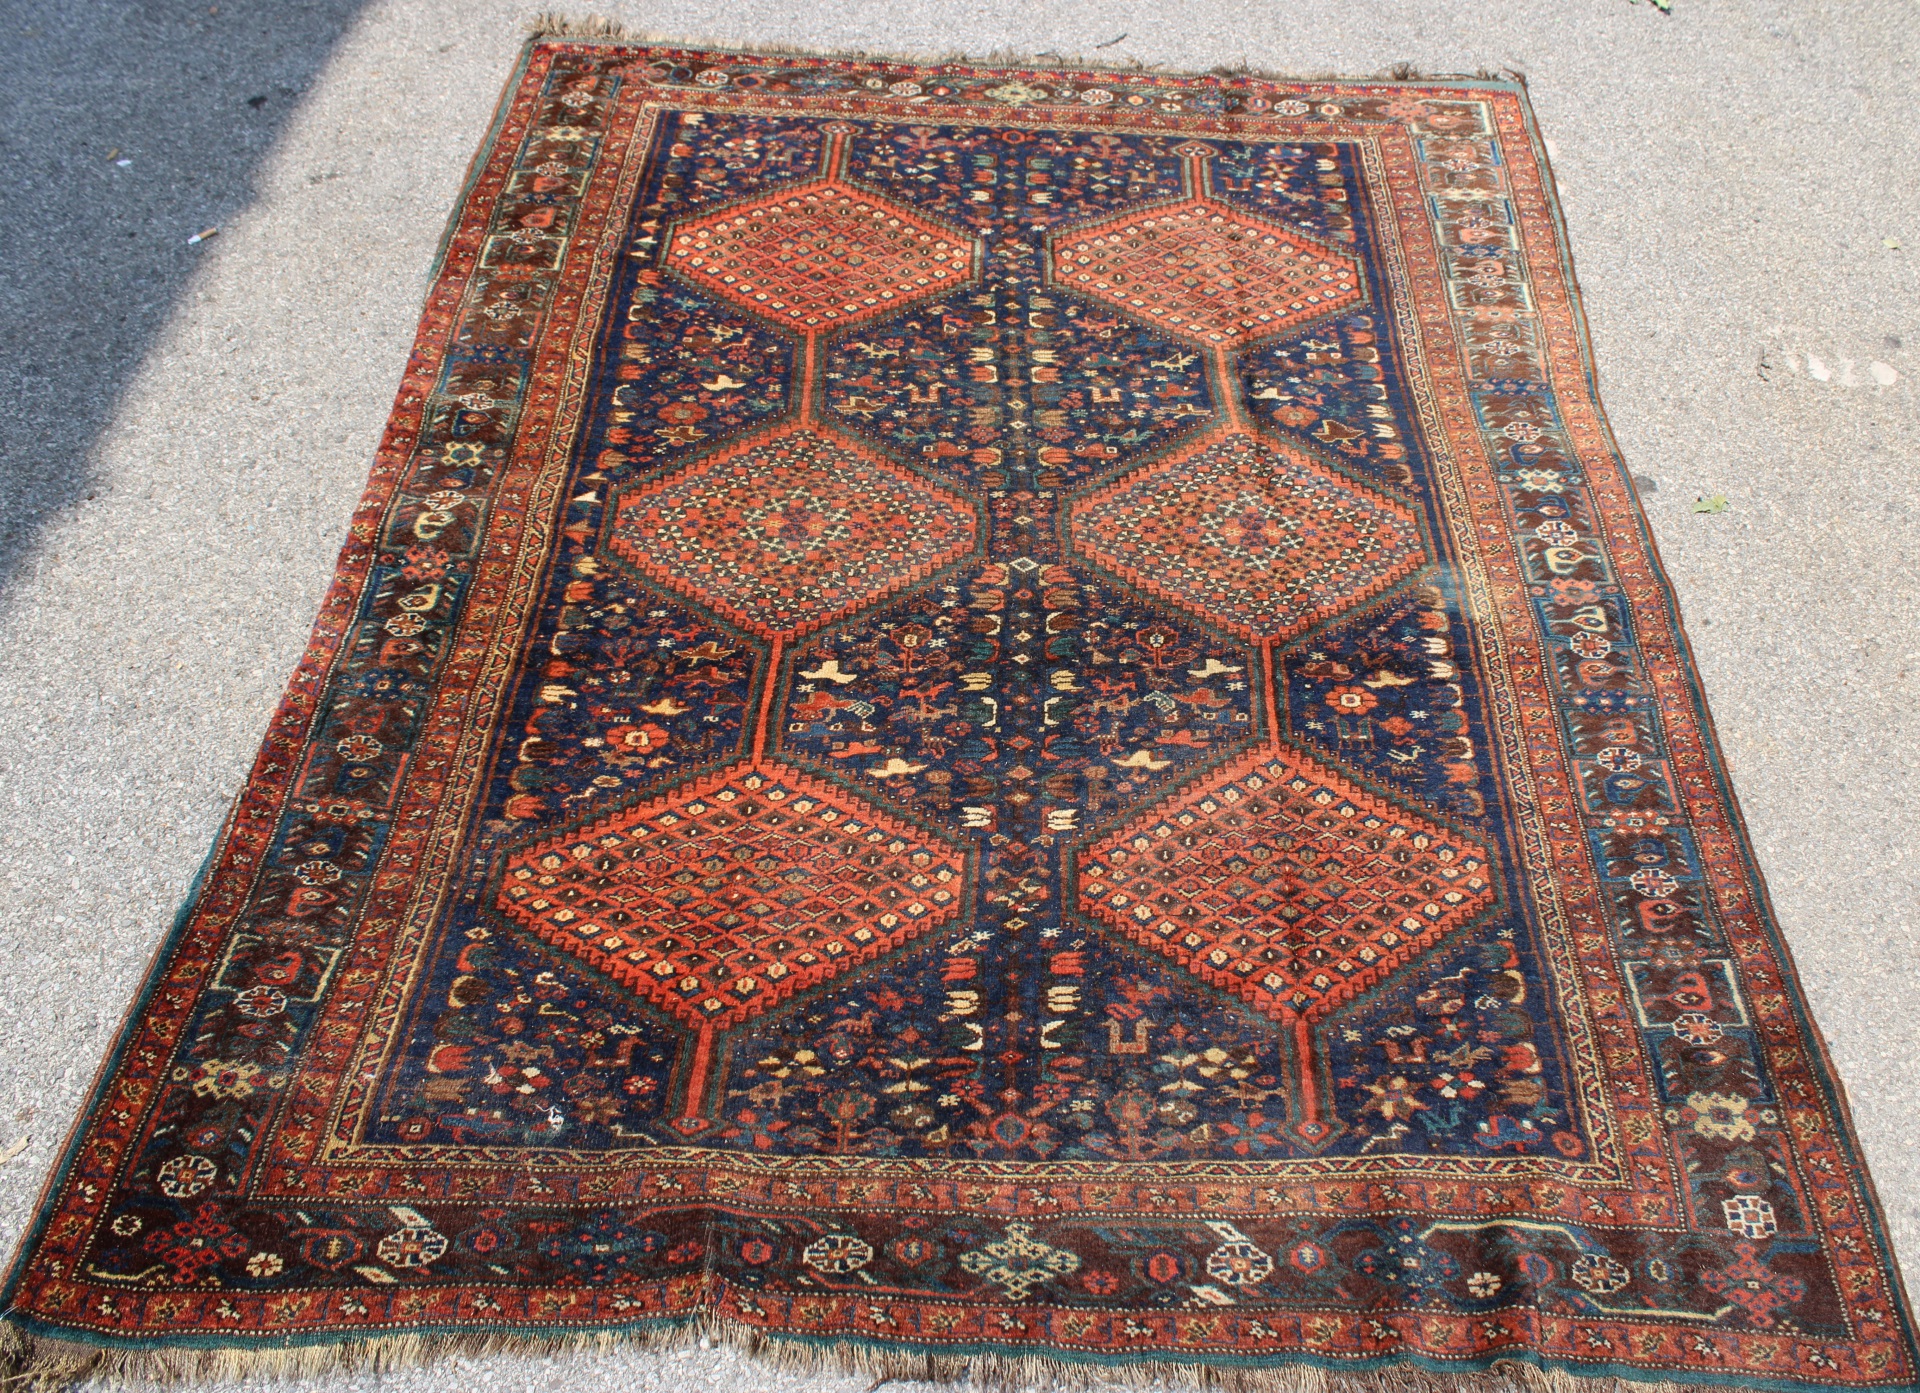 VINTAGE AND FINELY HAND WOVEN KAZAK 3bcf33